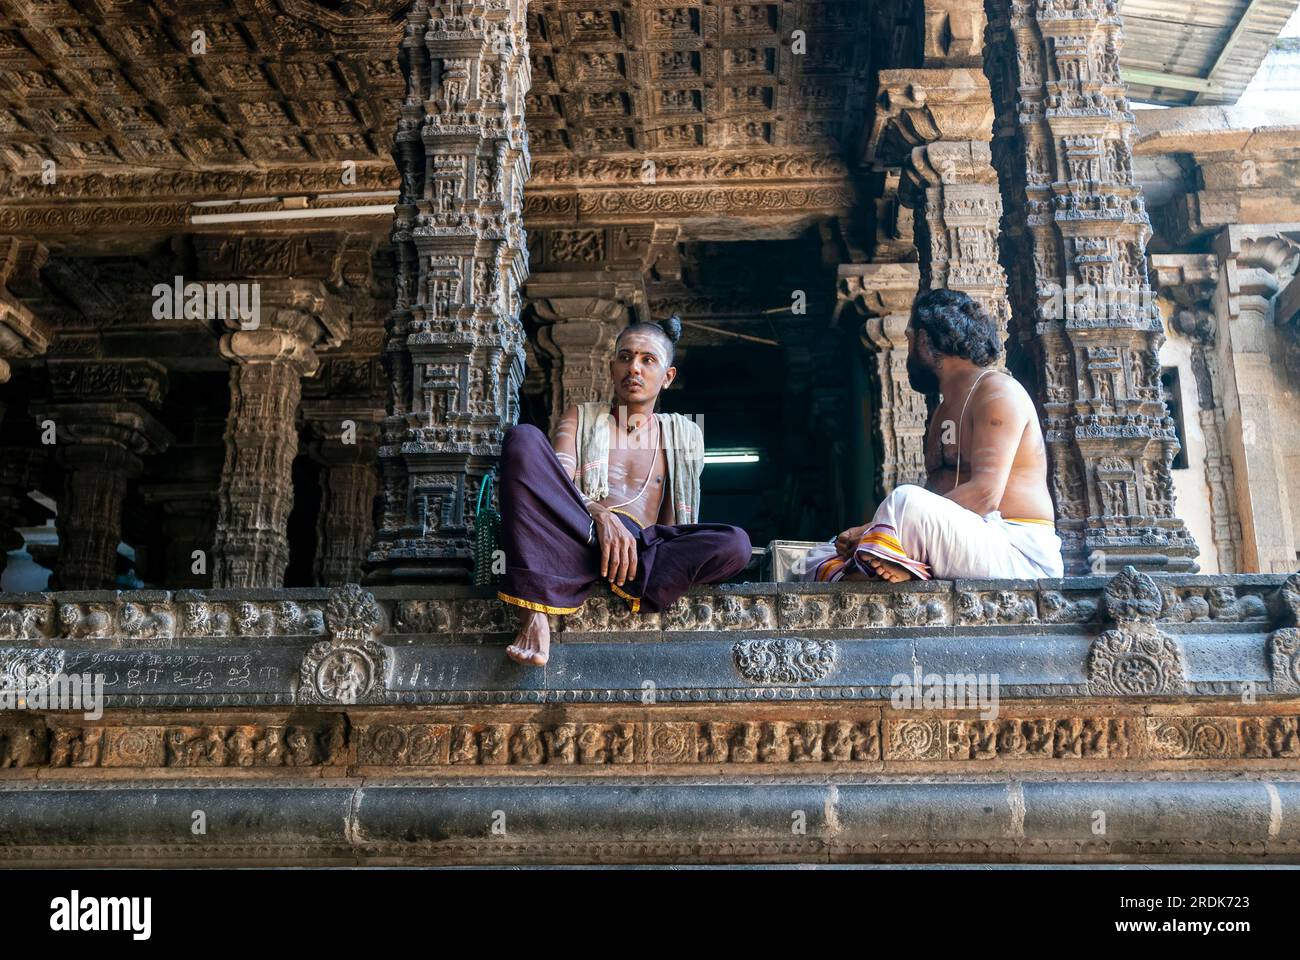 Temple priests at the Nritta Sabha or Hall of Dance with some fine pillars in Thillai Nataraja temple, Chidambaram, Tamil Nadu, South India, India Stock Photo